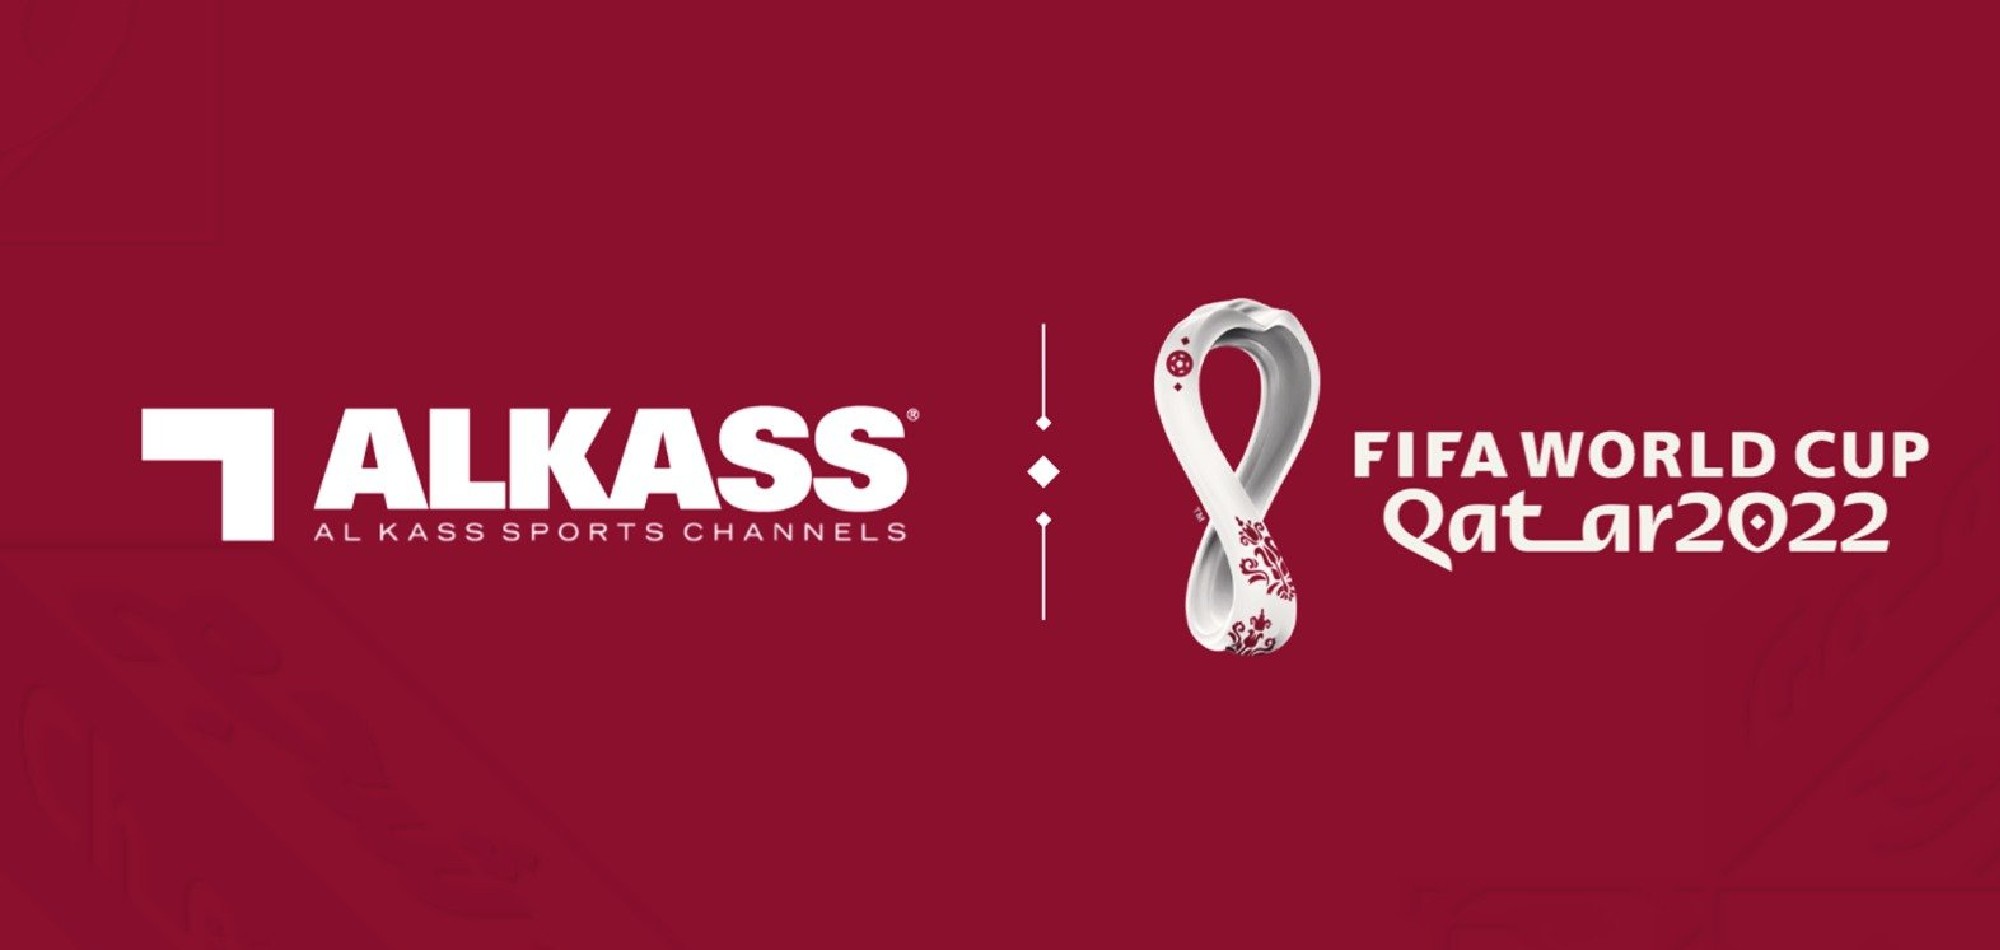 Al Kass Sports Channels has obtained the Broadcast Rights for the FIFA World Cup Qatar 2022